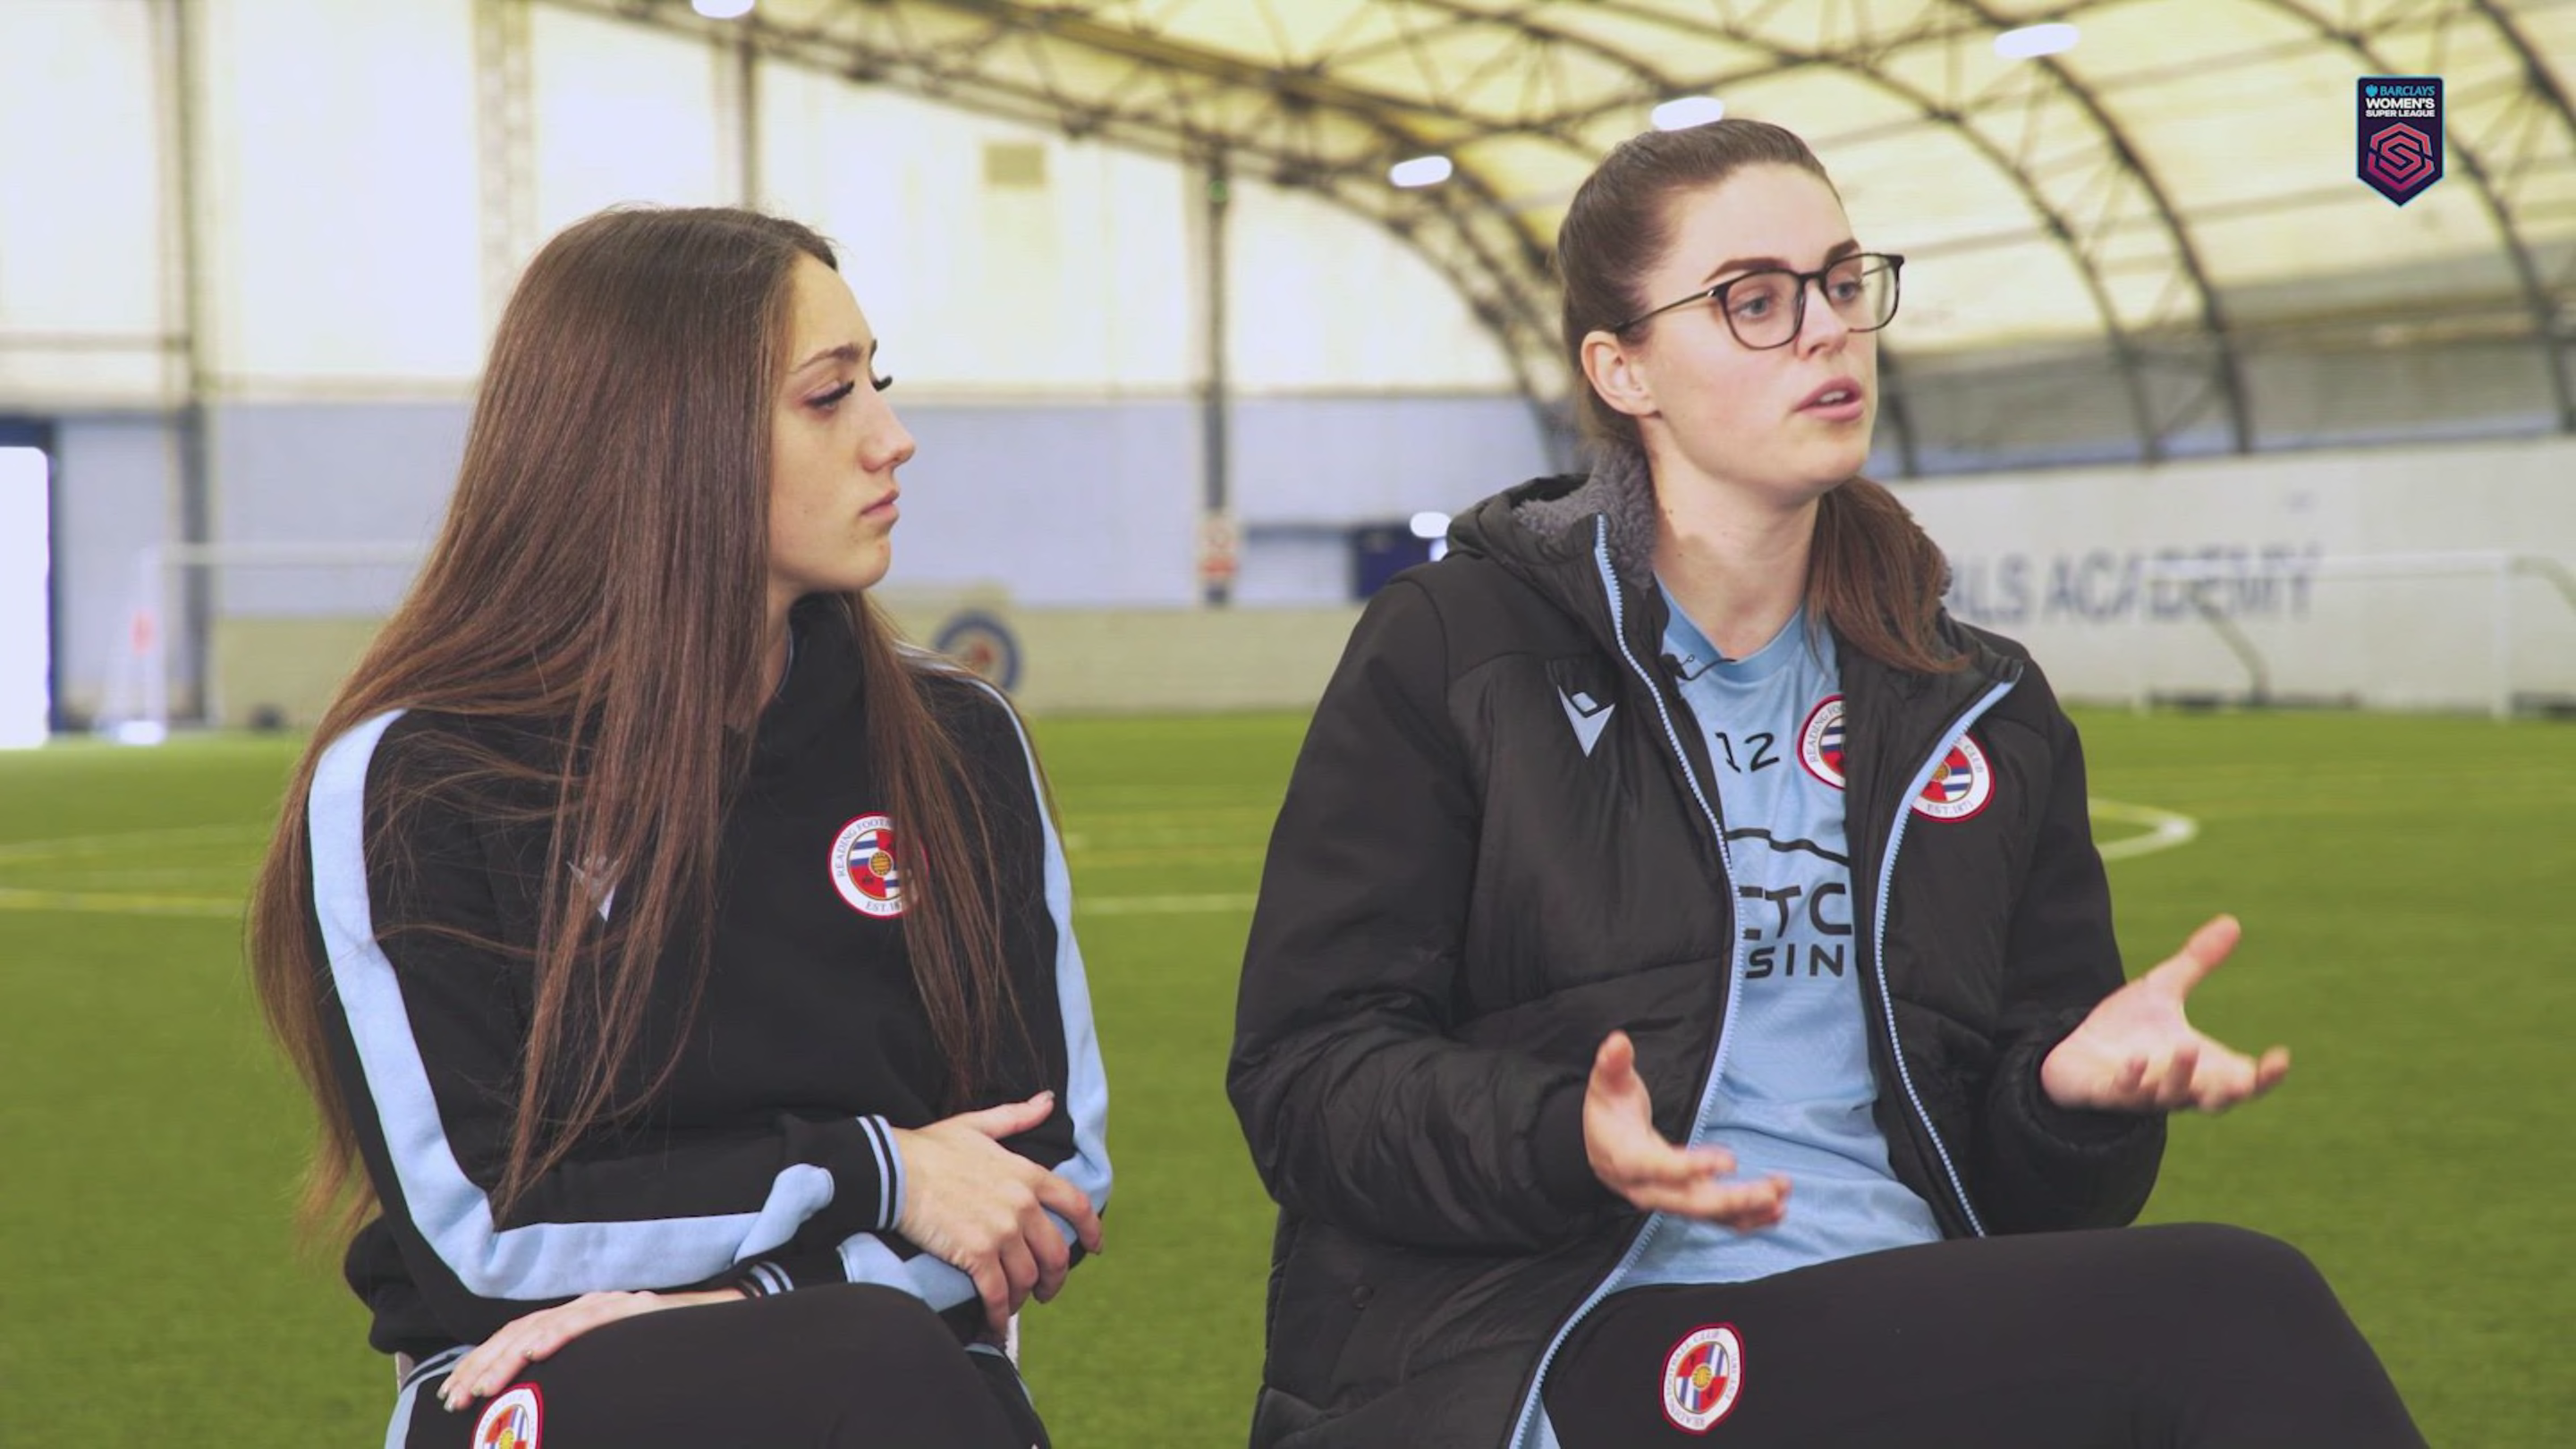 WSL Women's Football Weekend: 'What it Means' with Tia Primmer and Emma Harries